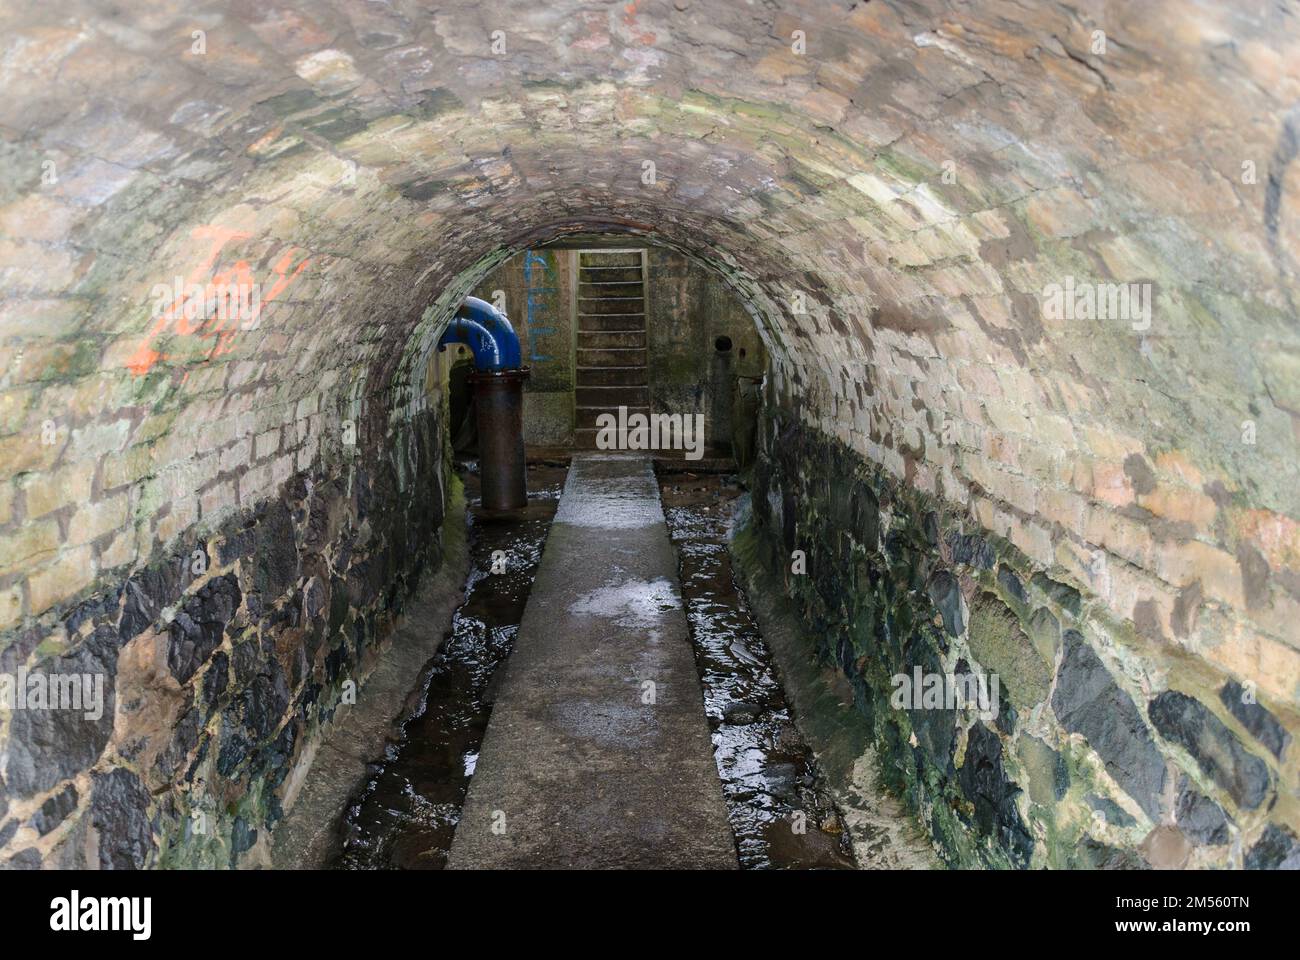 Dirty water runs down the sides of a path through a sewer tunnel Stock Photo